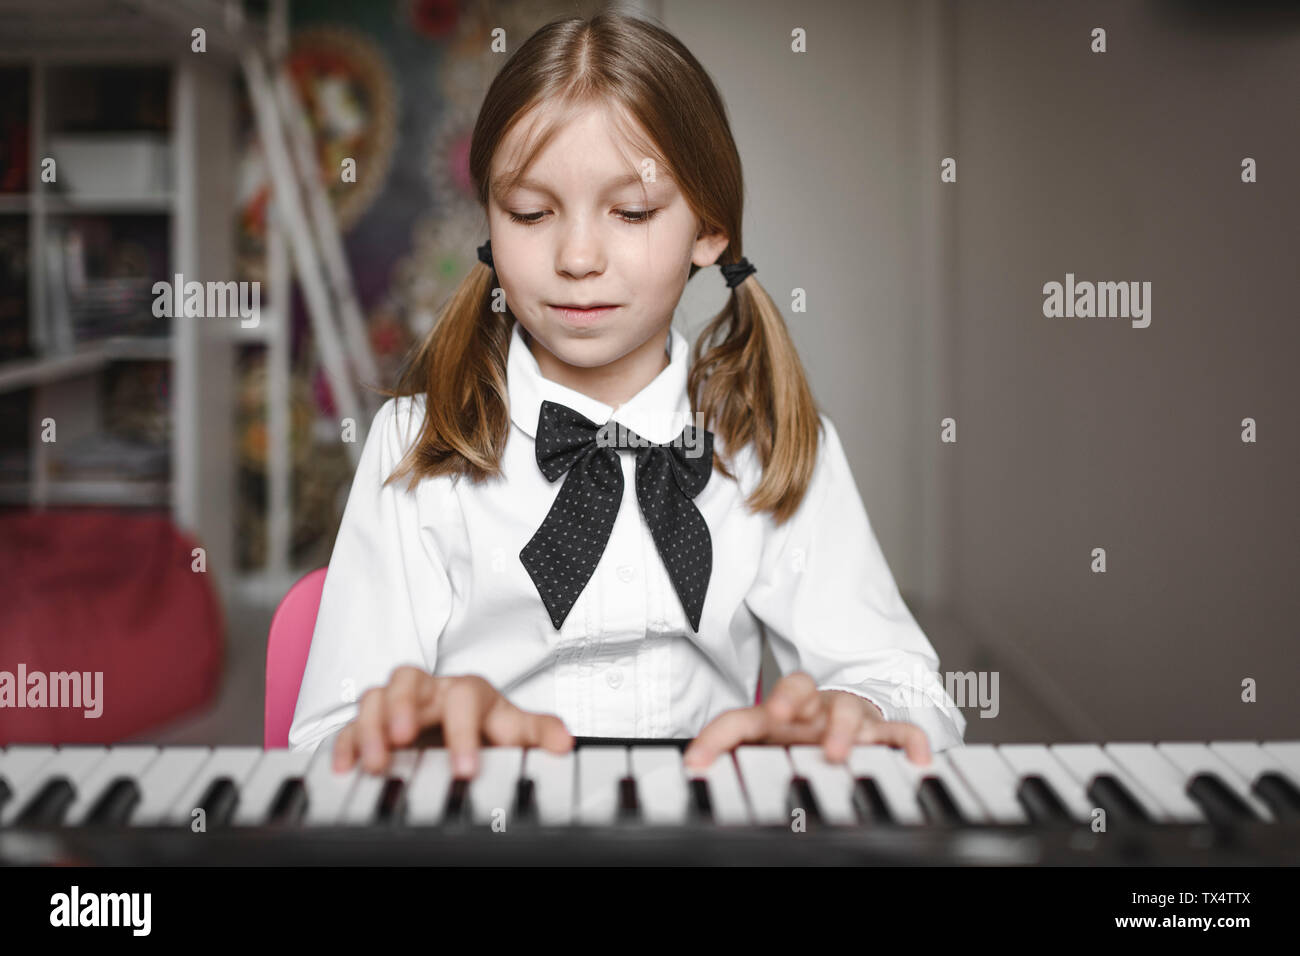 Portrait of a Girl playing synthesizer Banque D'Images